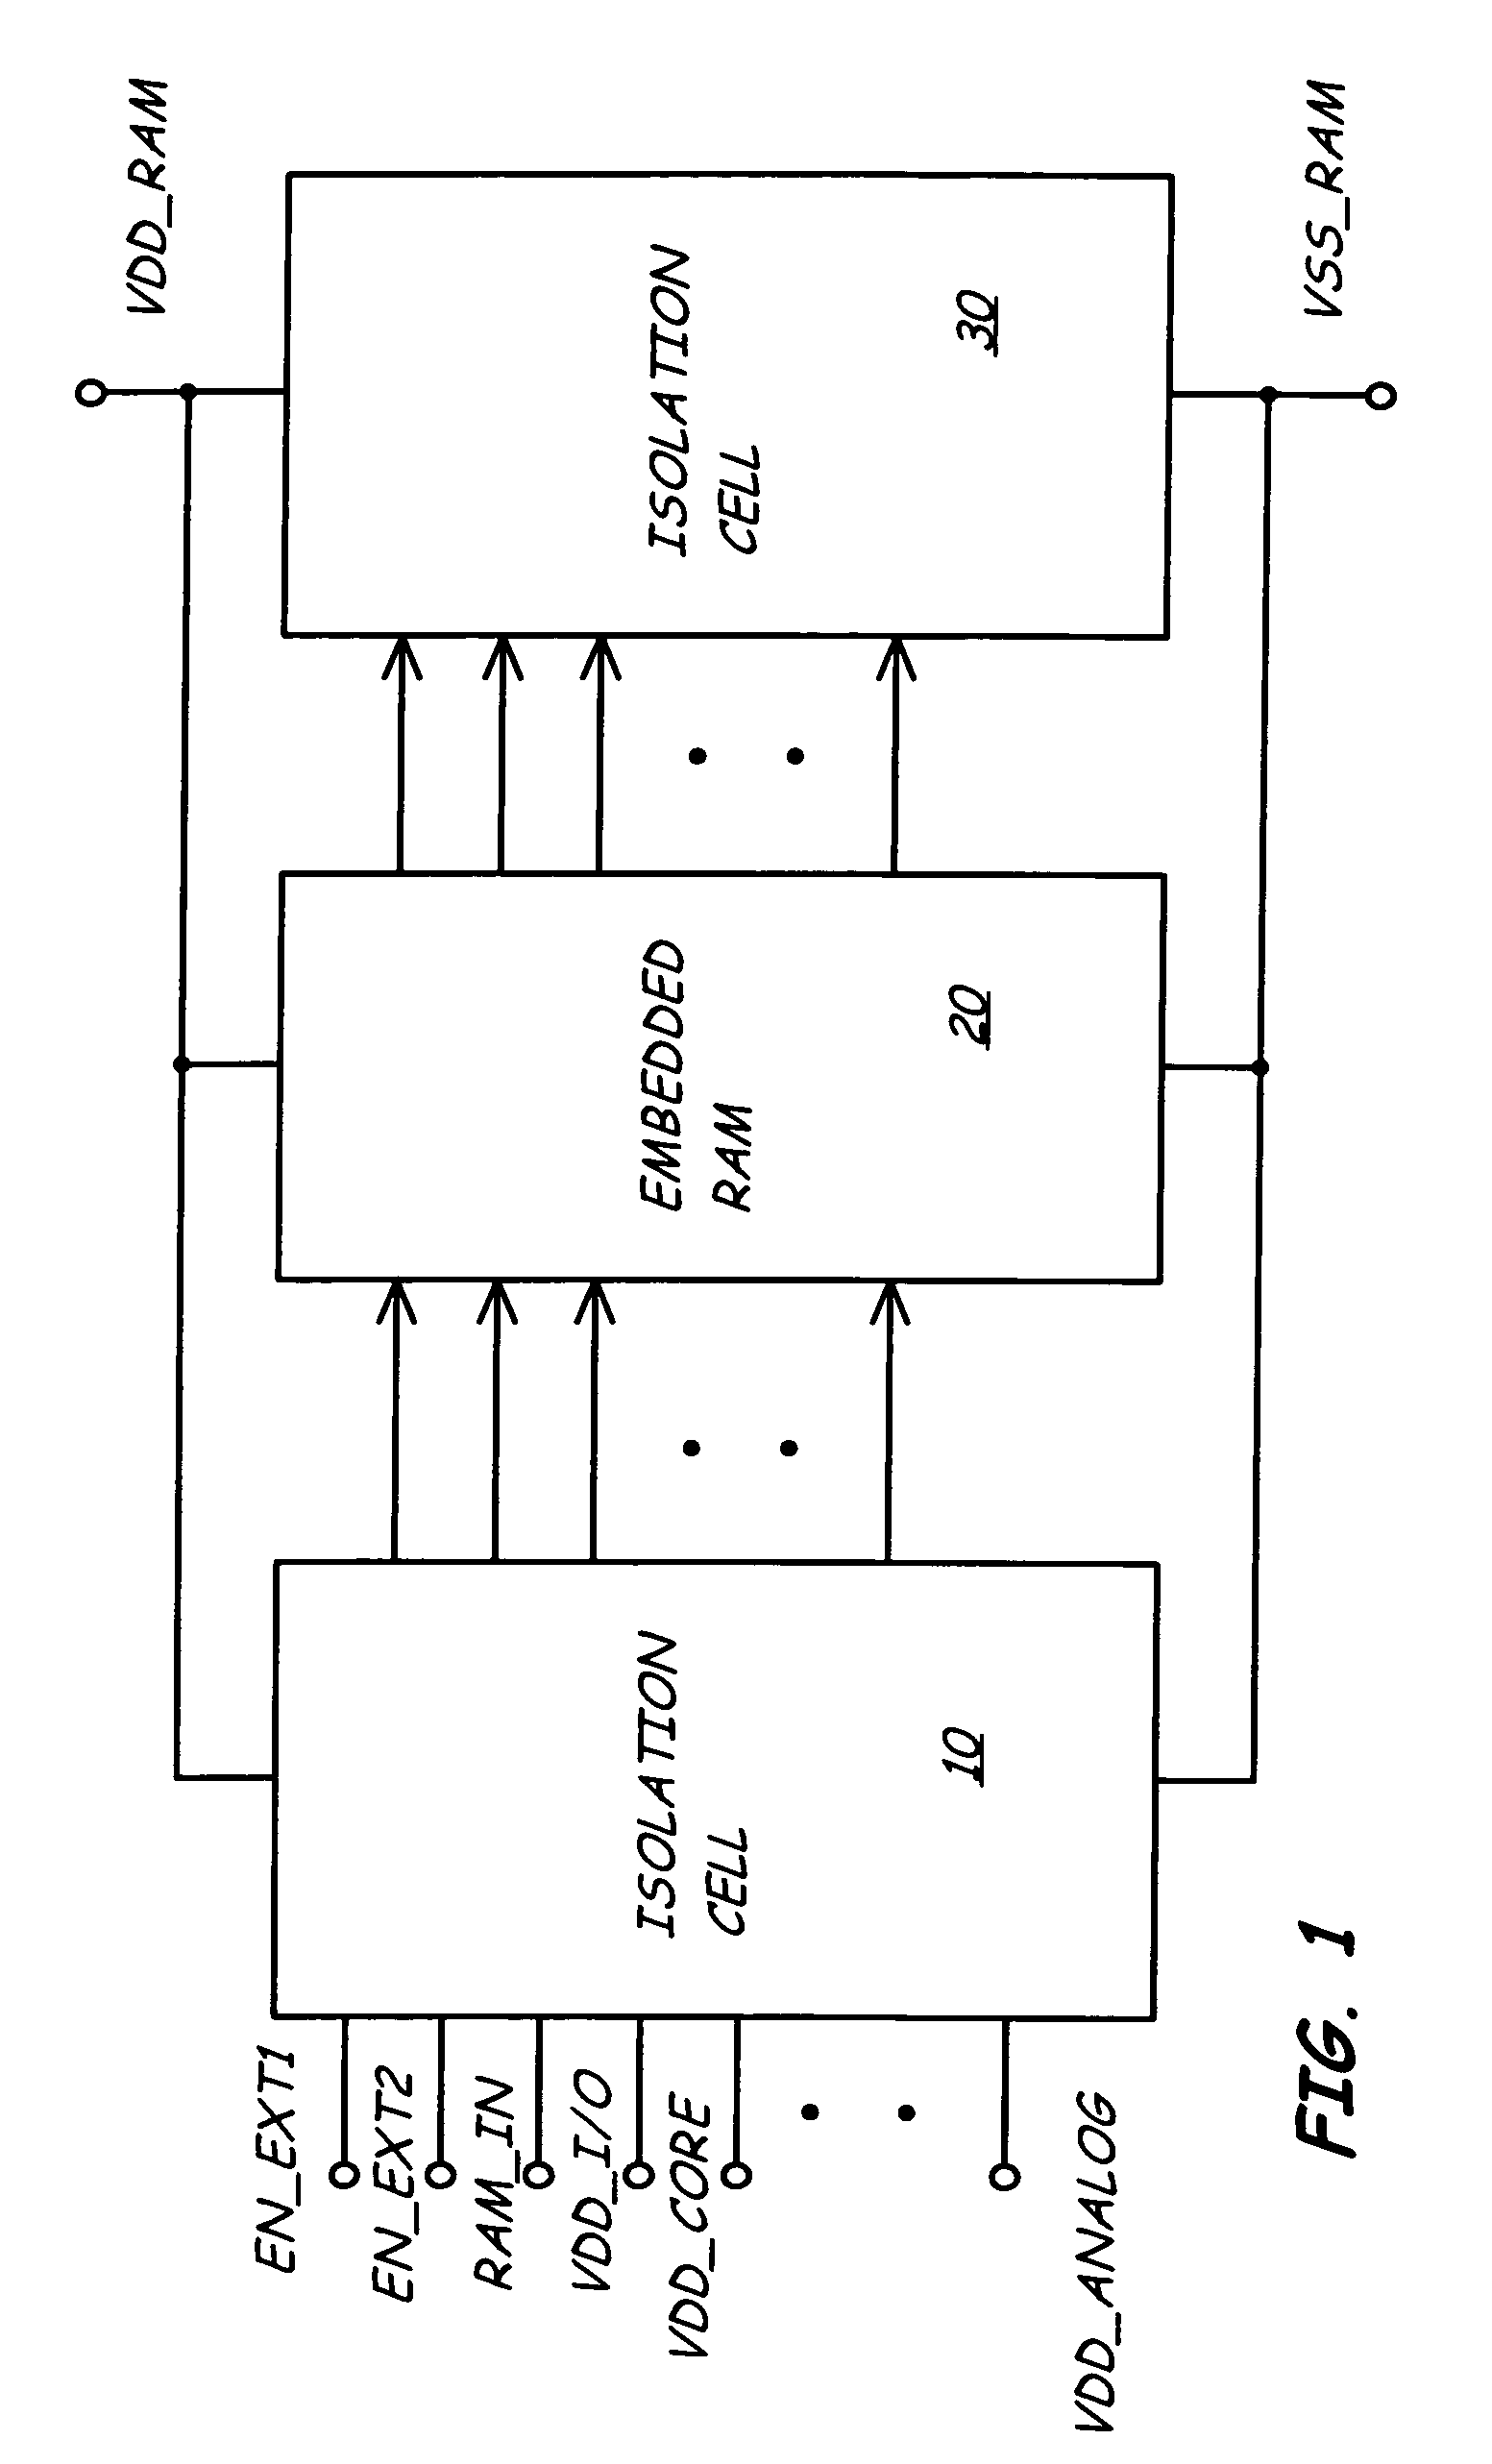 CMOS isolation cell for embedded memory in power failure environments